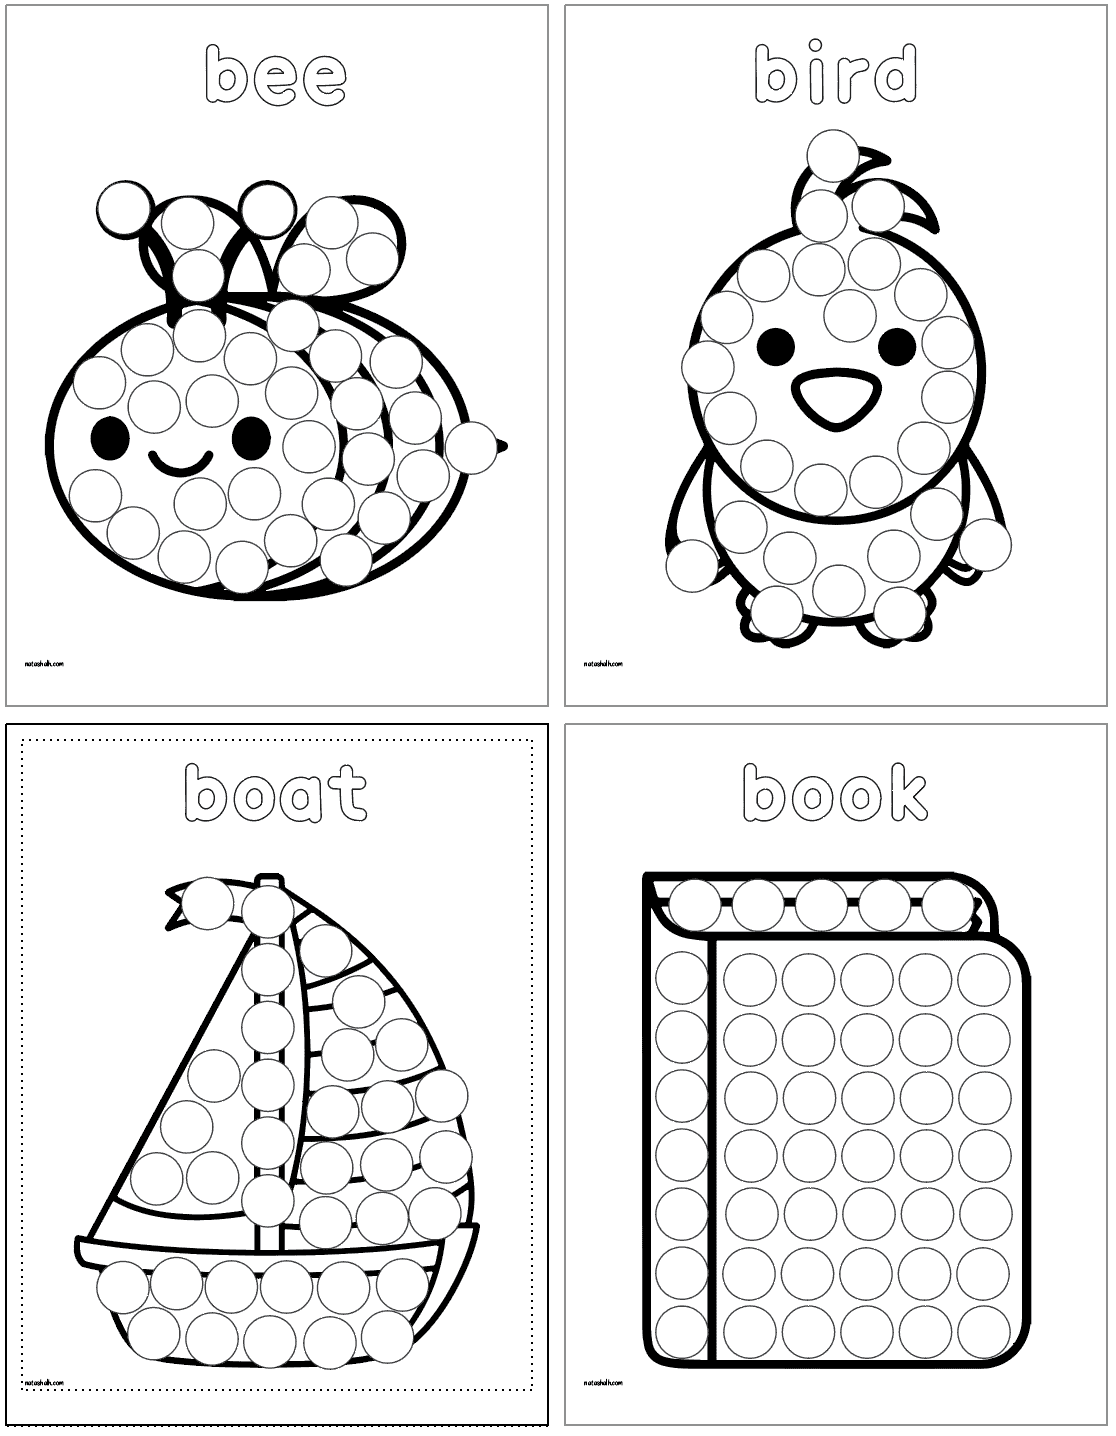 A preview of four letter b themed dot marker pages. They show: a bee, a bird, a boat, and a book